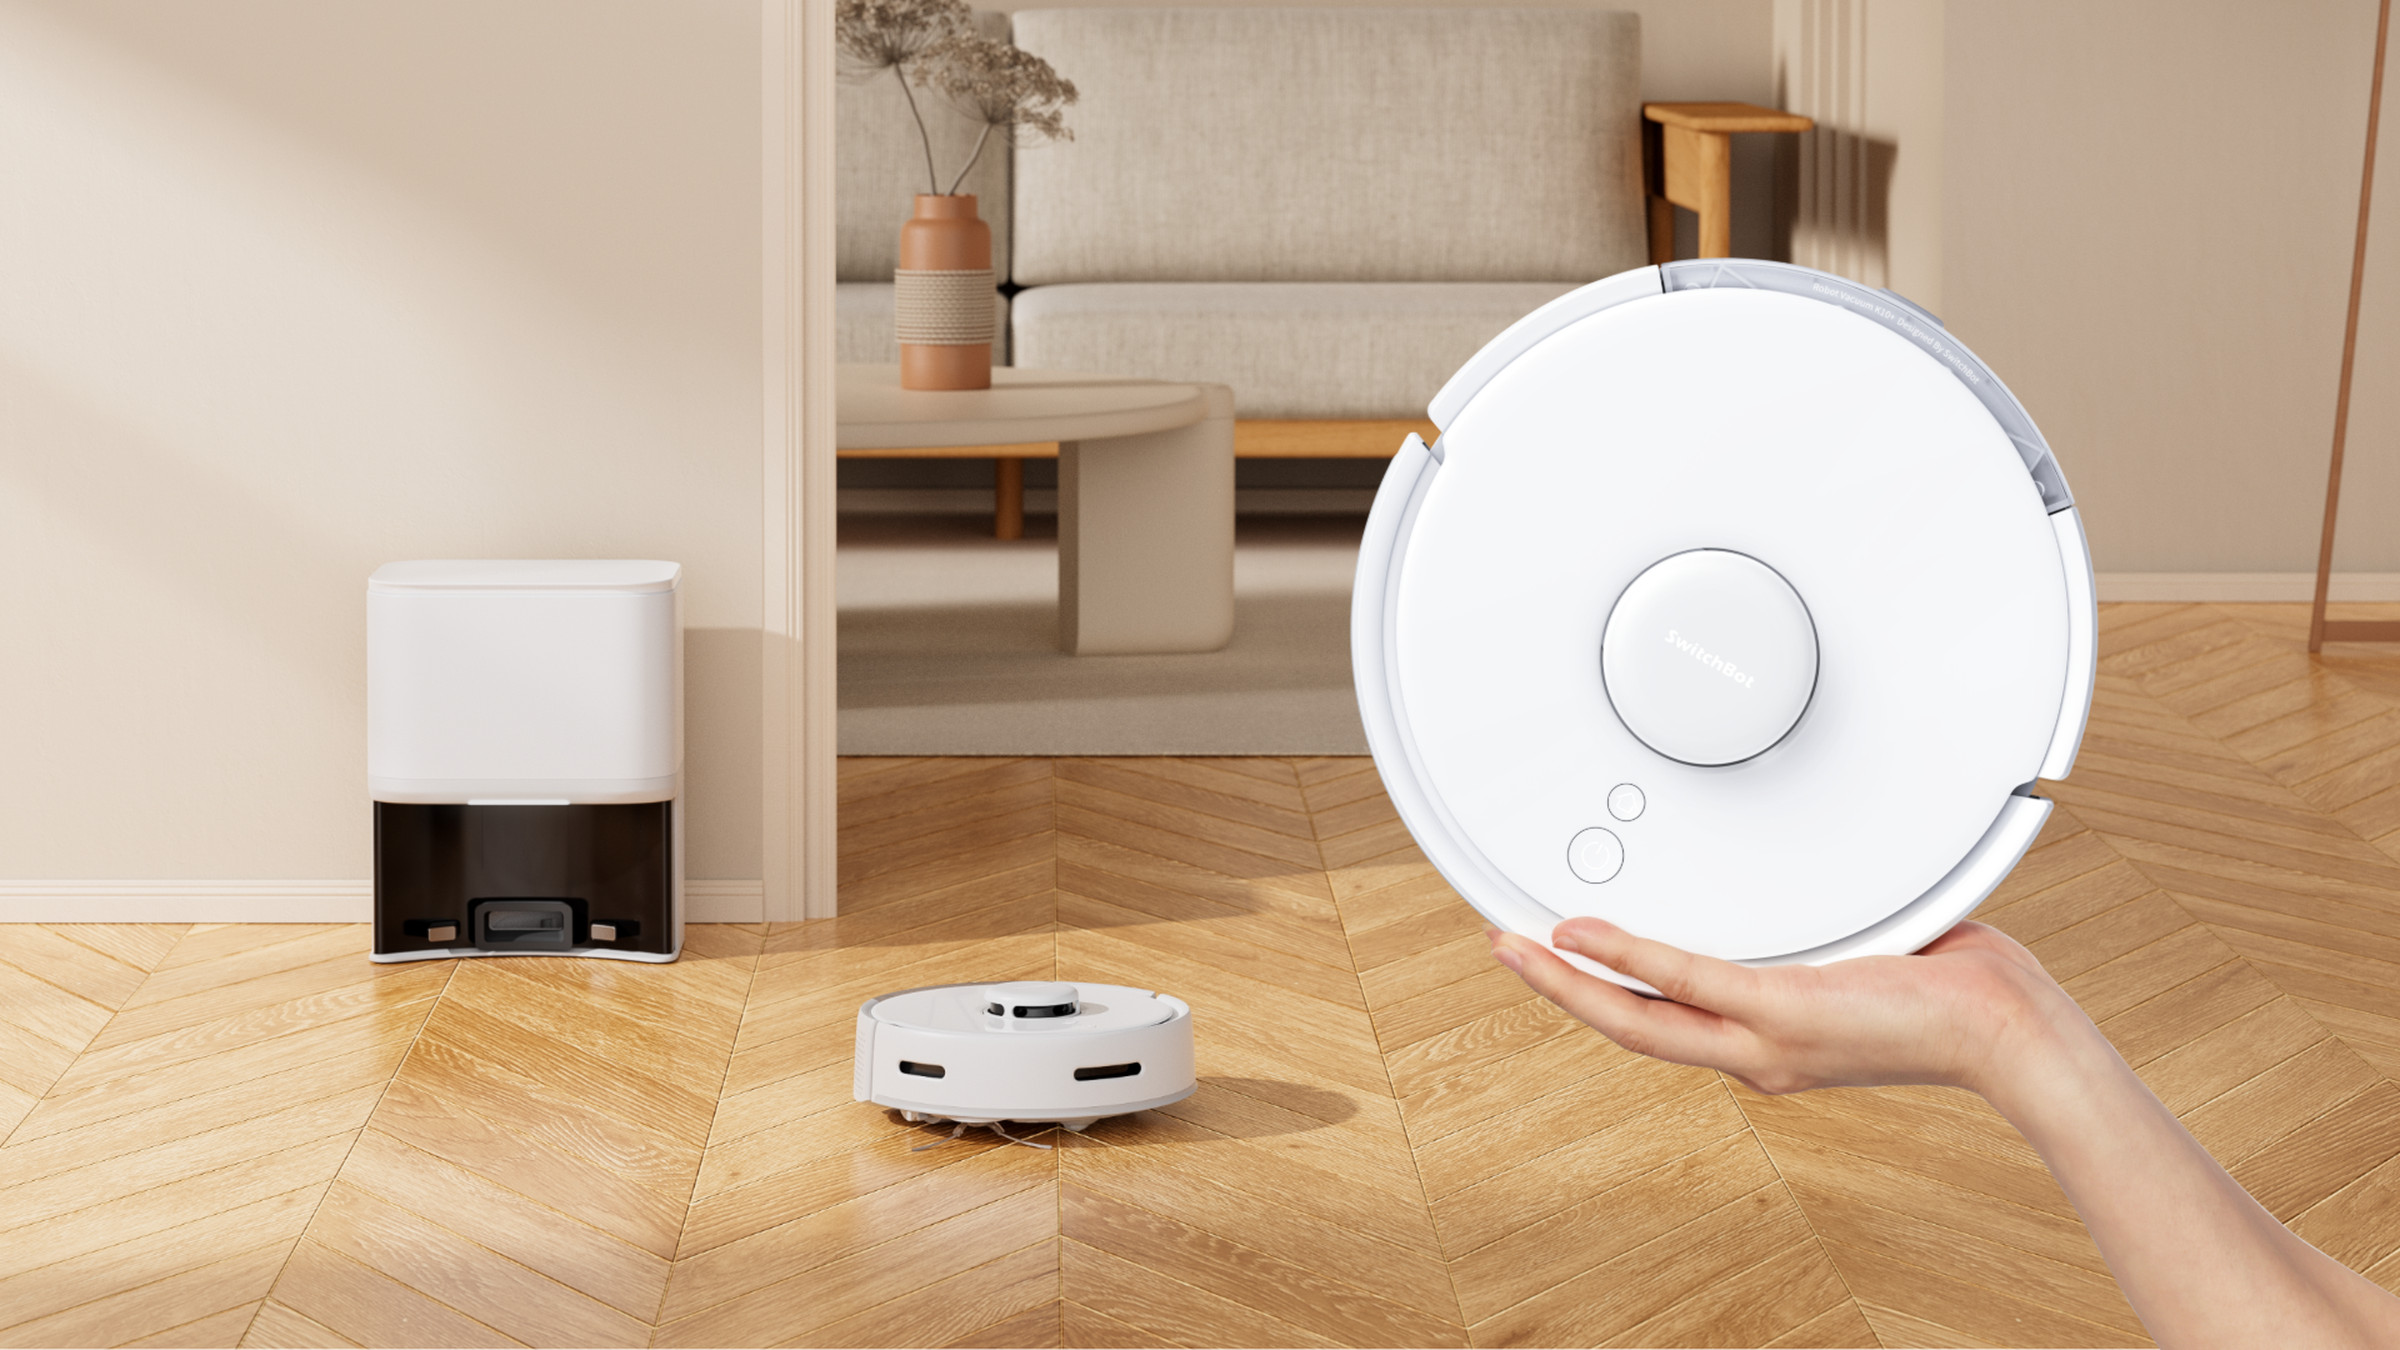 The K10 is the world’s smallest robot vacuum, according to SwitchBot.